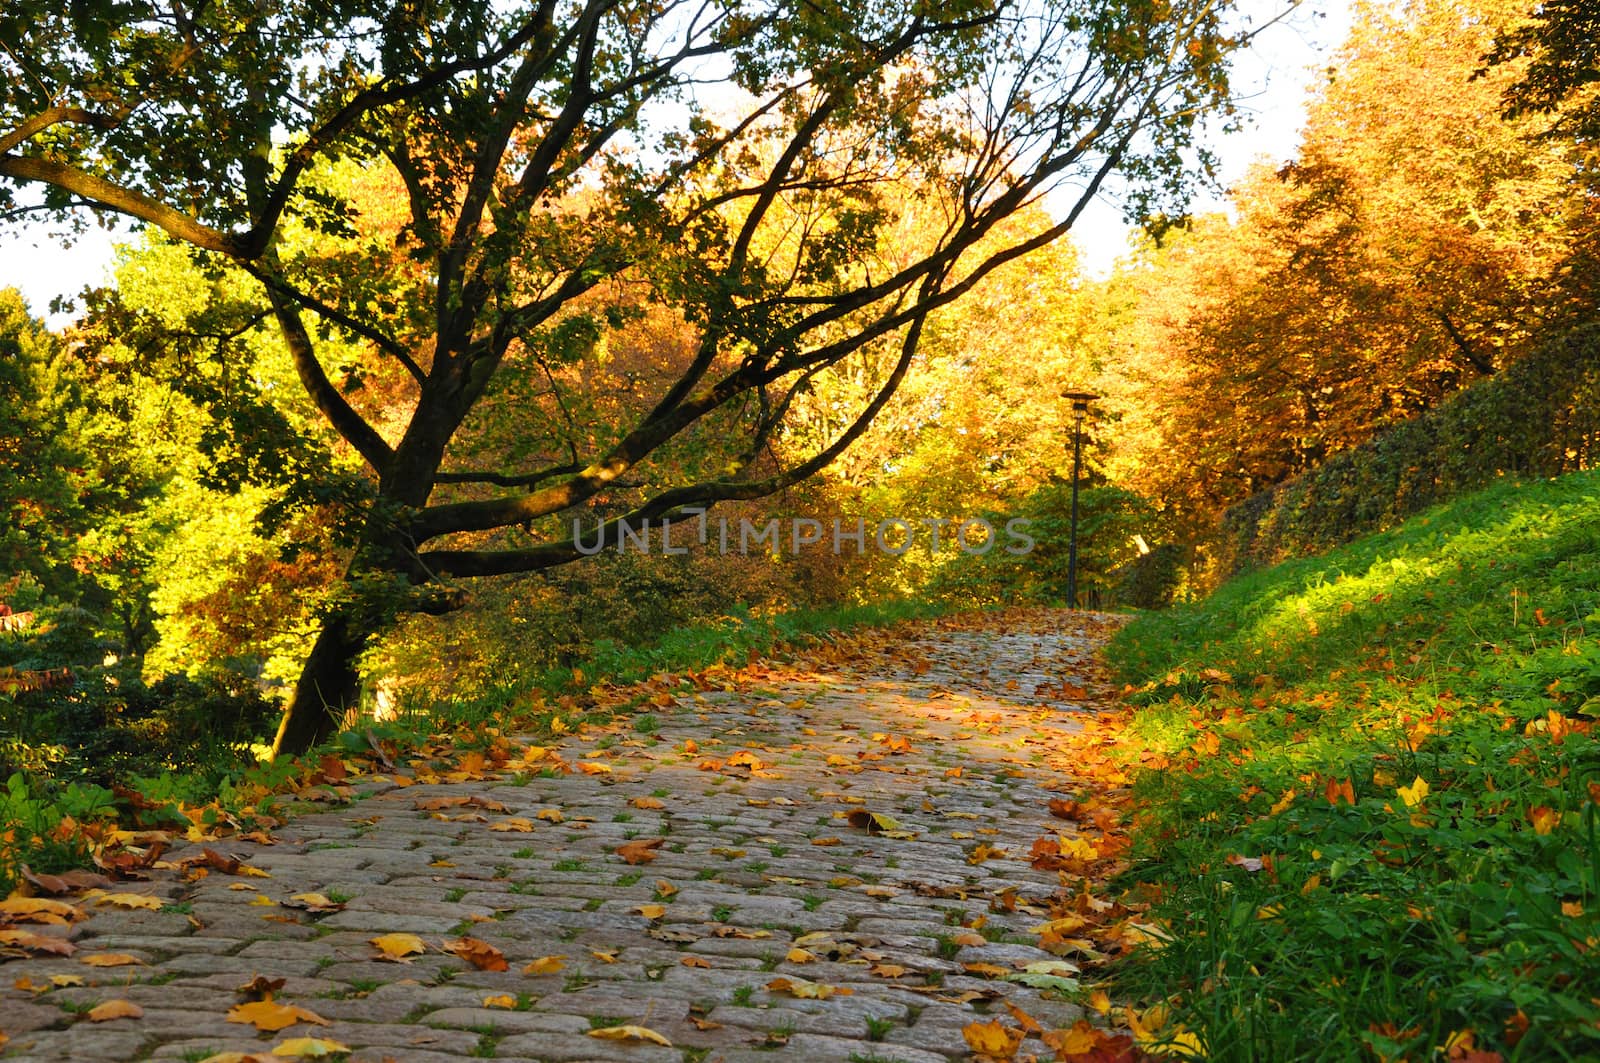 Nice pathway in the city at autumn in Fulda, Hessen, Germany